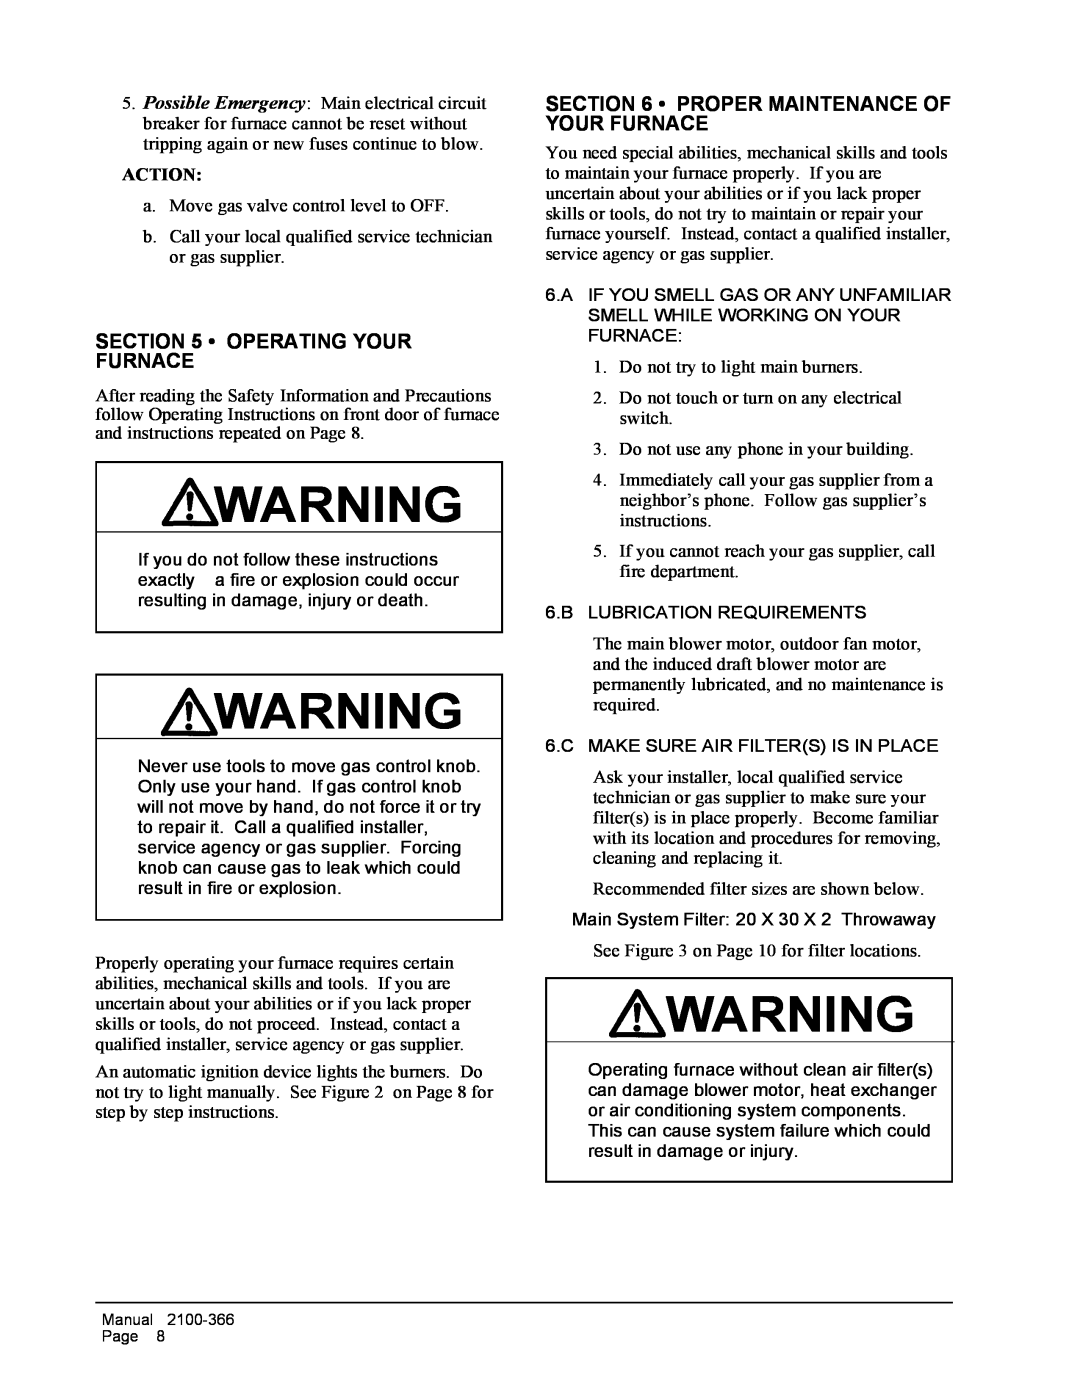 Bard WG-Series installation instructions Operating Your Furnace, Proper Maintenance Of Your Furnace 